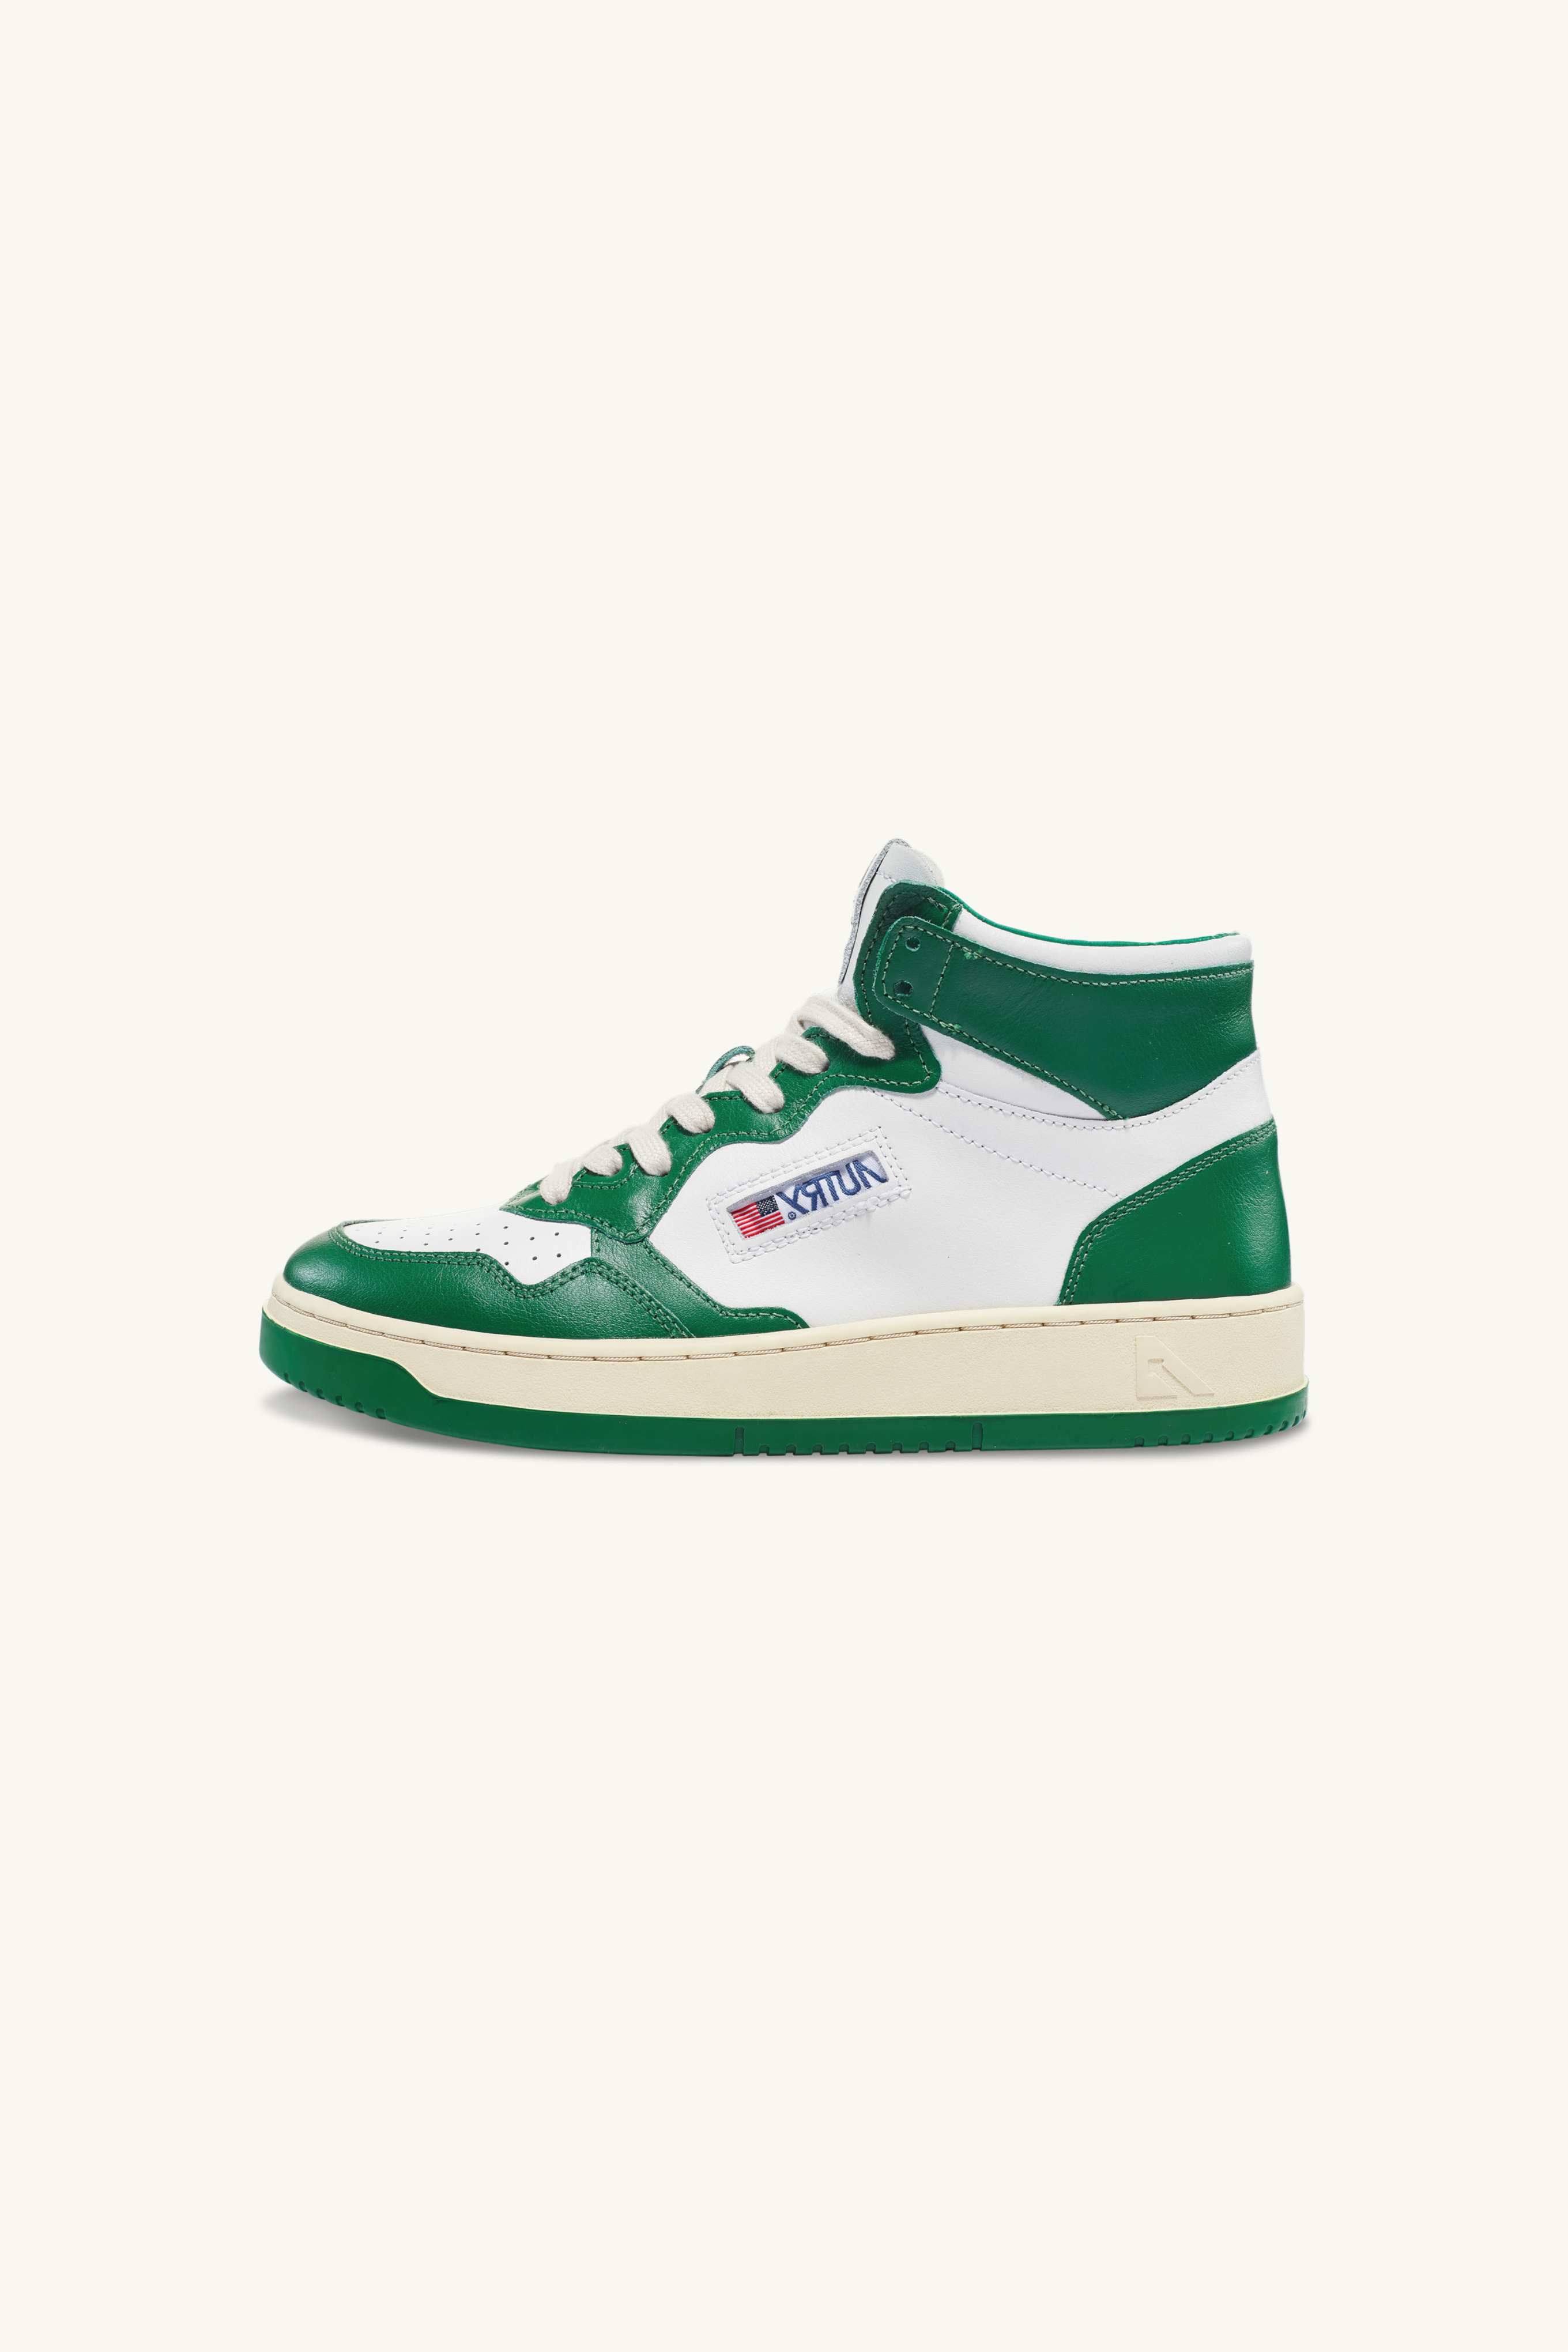 AUMM-WB03 - MEDALIST MID SNEAKERS IN TWO-TONE LEATHER COLOR WHITE AND GREEN